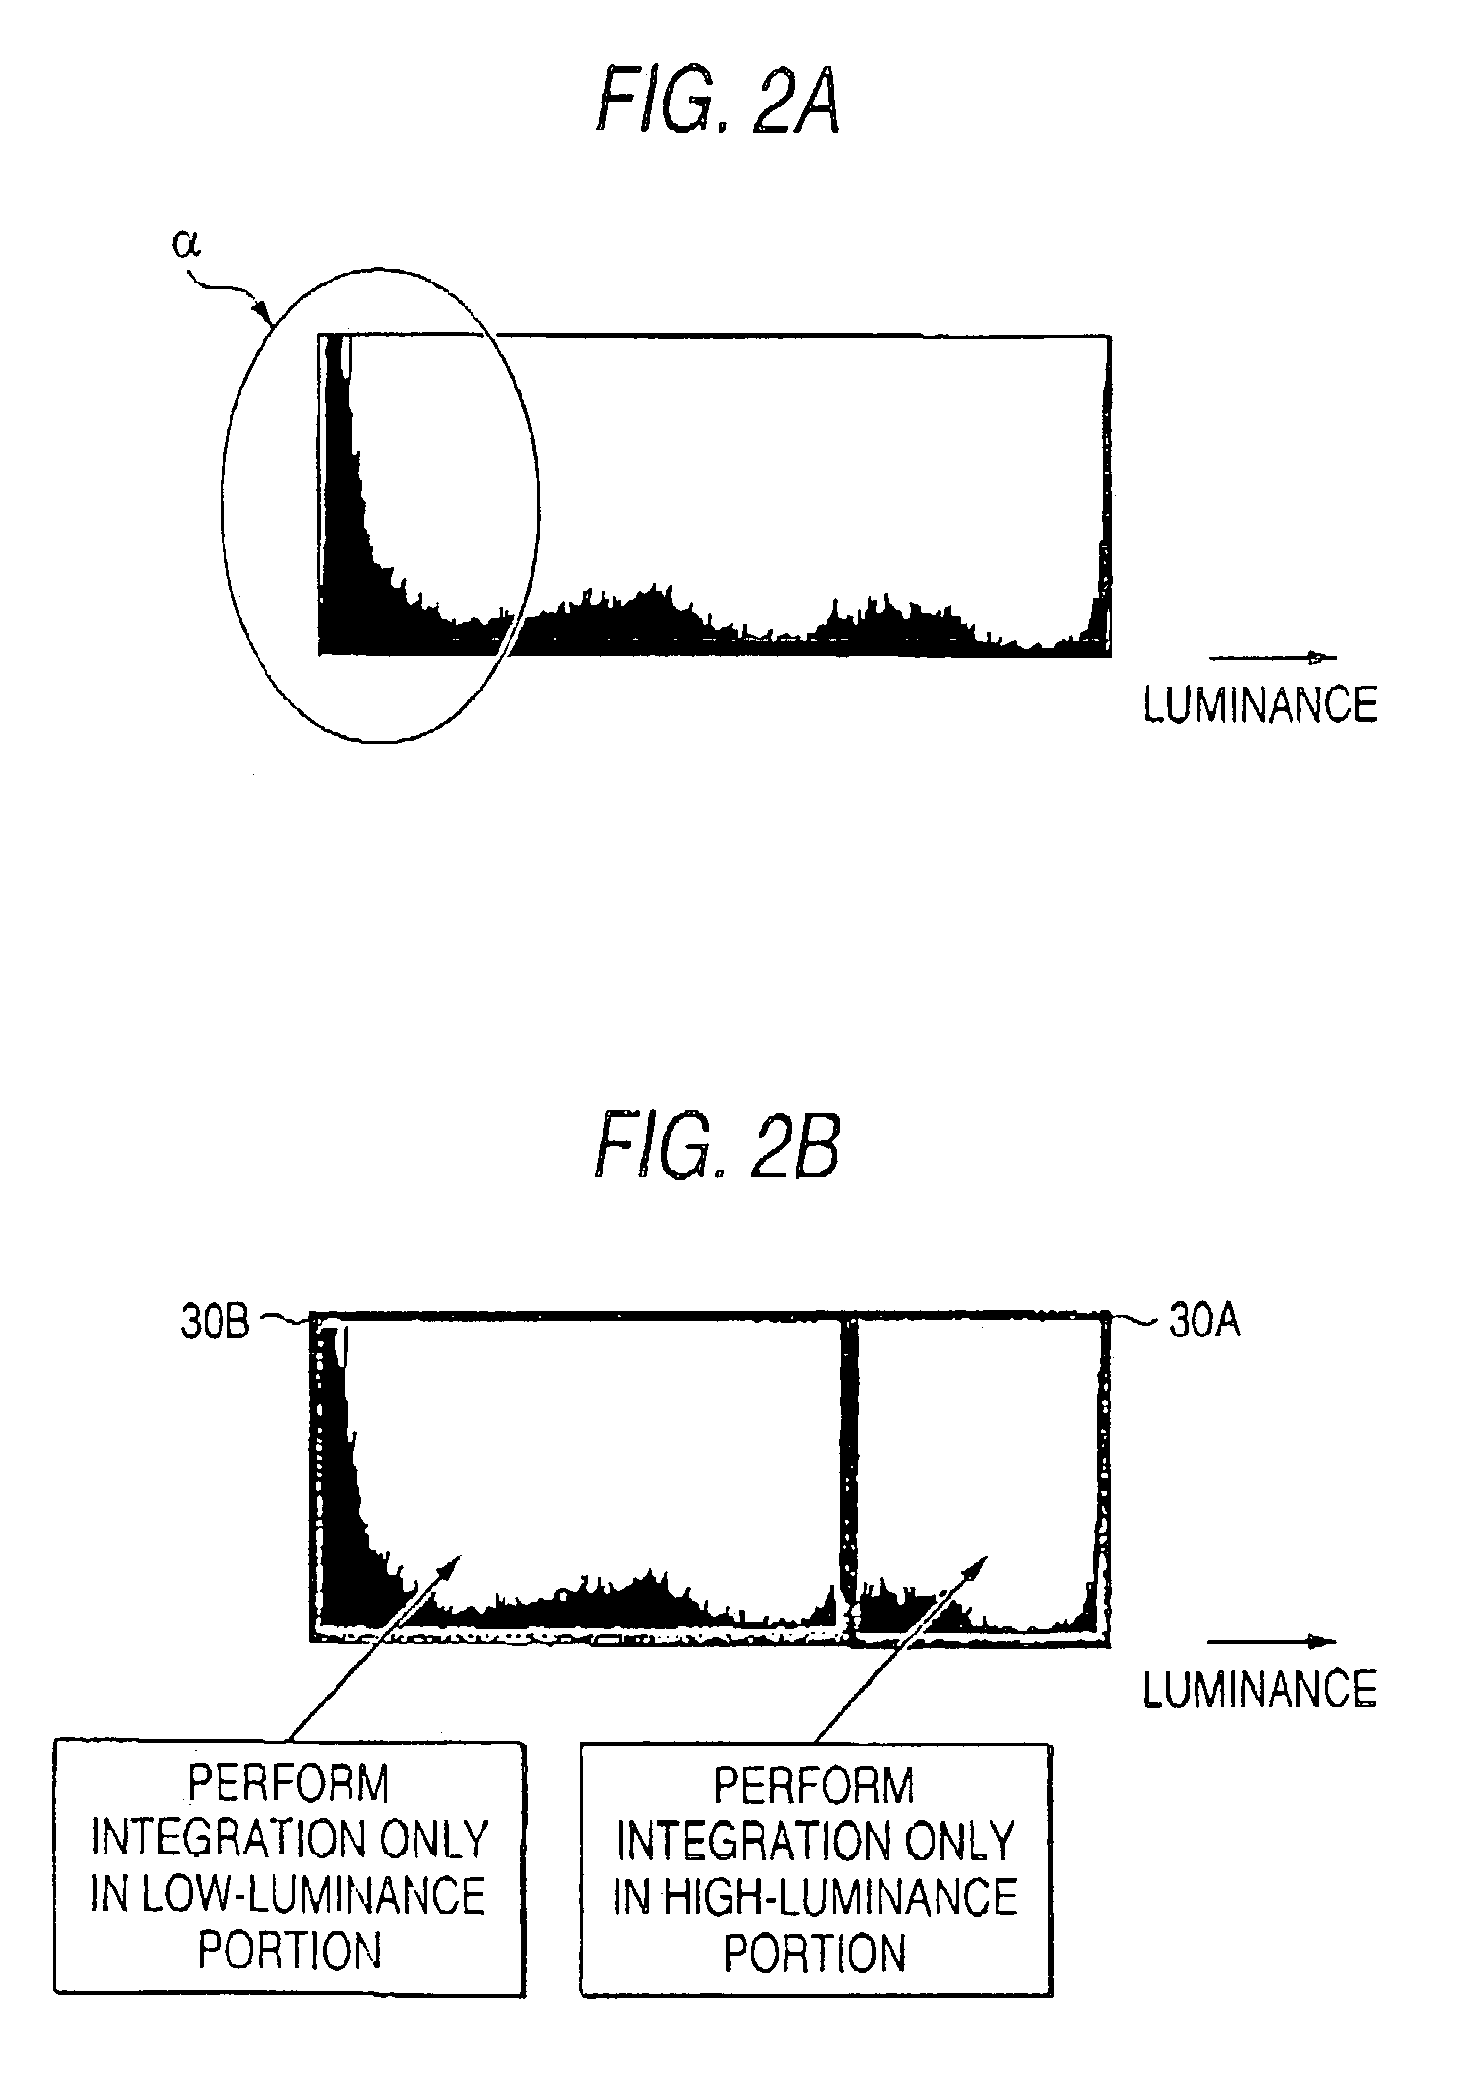 Image apparatus and method for compensating for high and low luminance image portions via exposure control and gamma correction